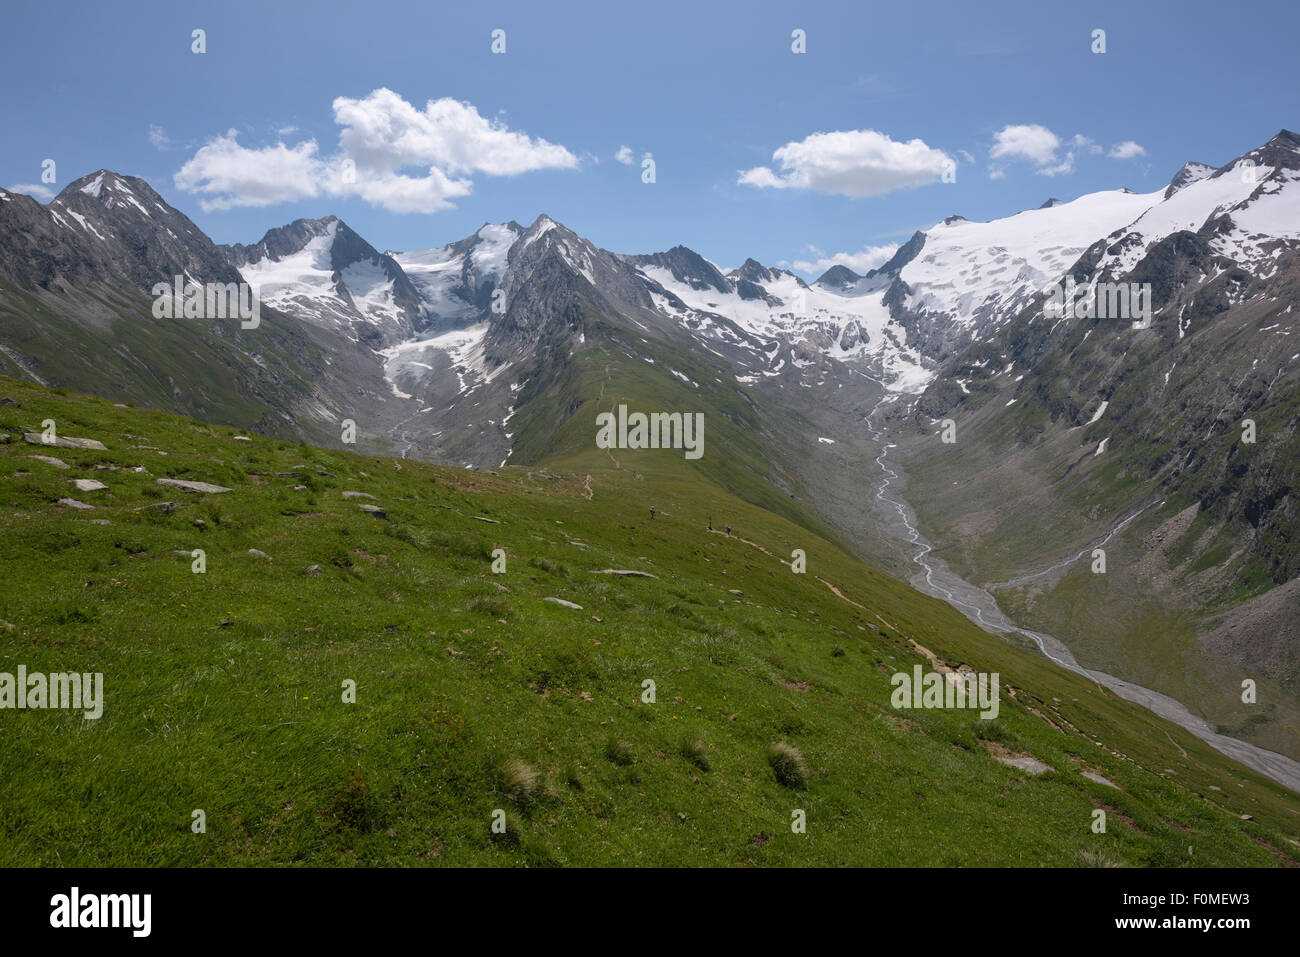 hiking trail through green mountain and glacier landscape in summer, Obergurgl, Oetztal, Austria Stock Photo